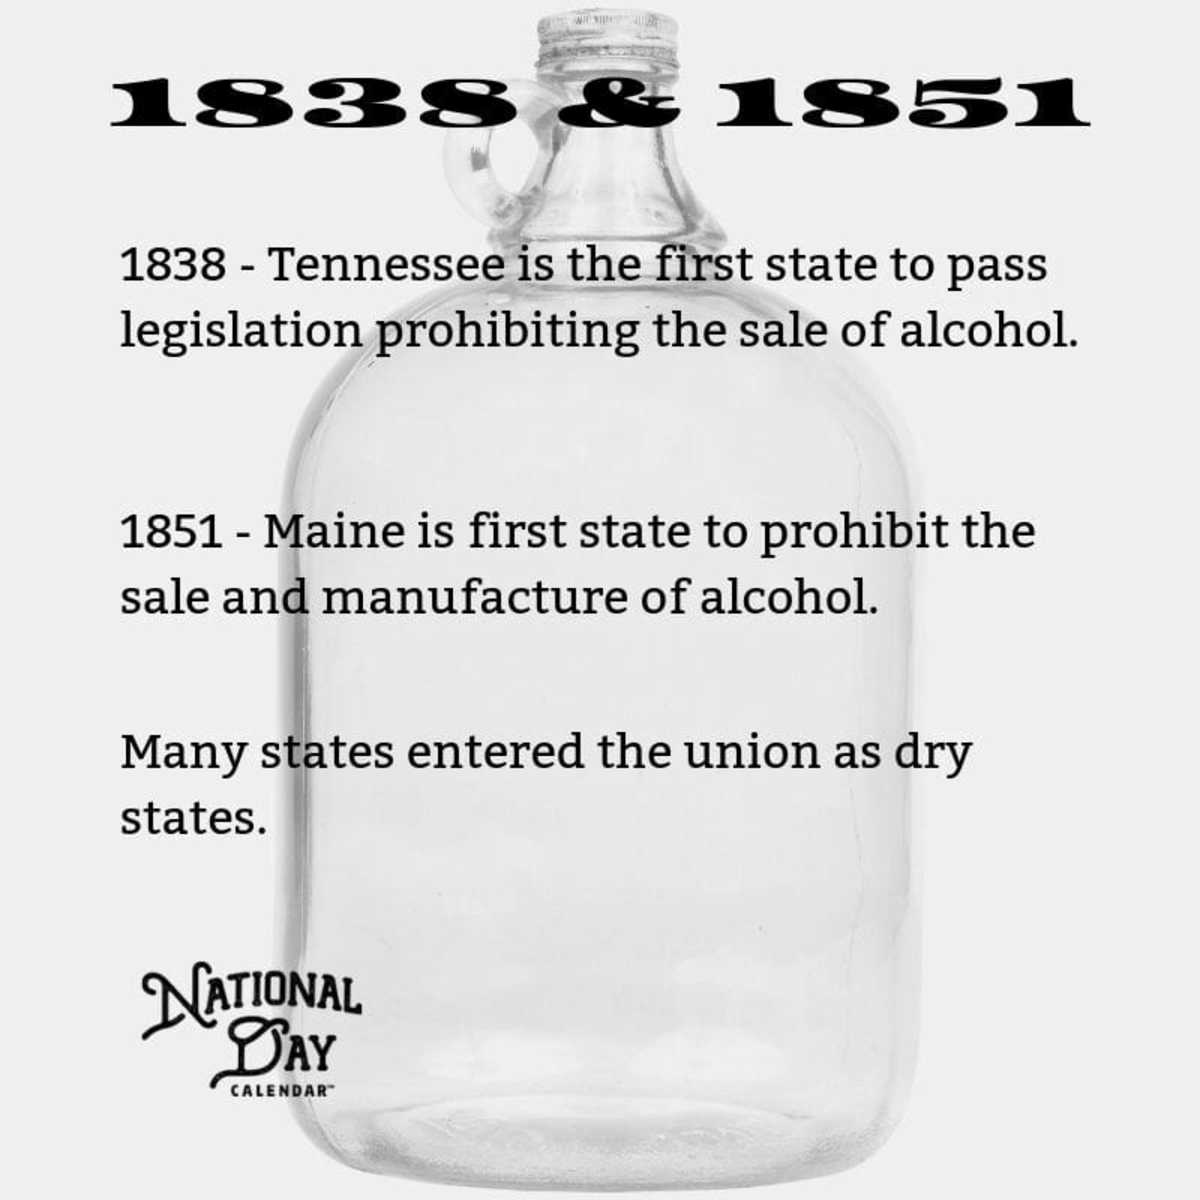 1838 Prohibition History - Temperance Movement Began - 100 years of prohibition history